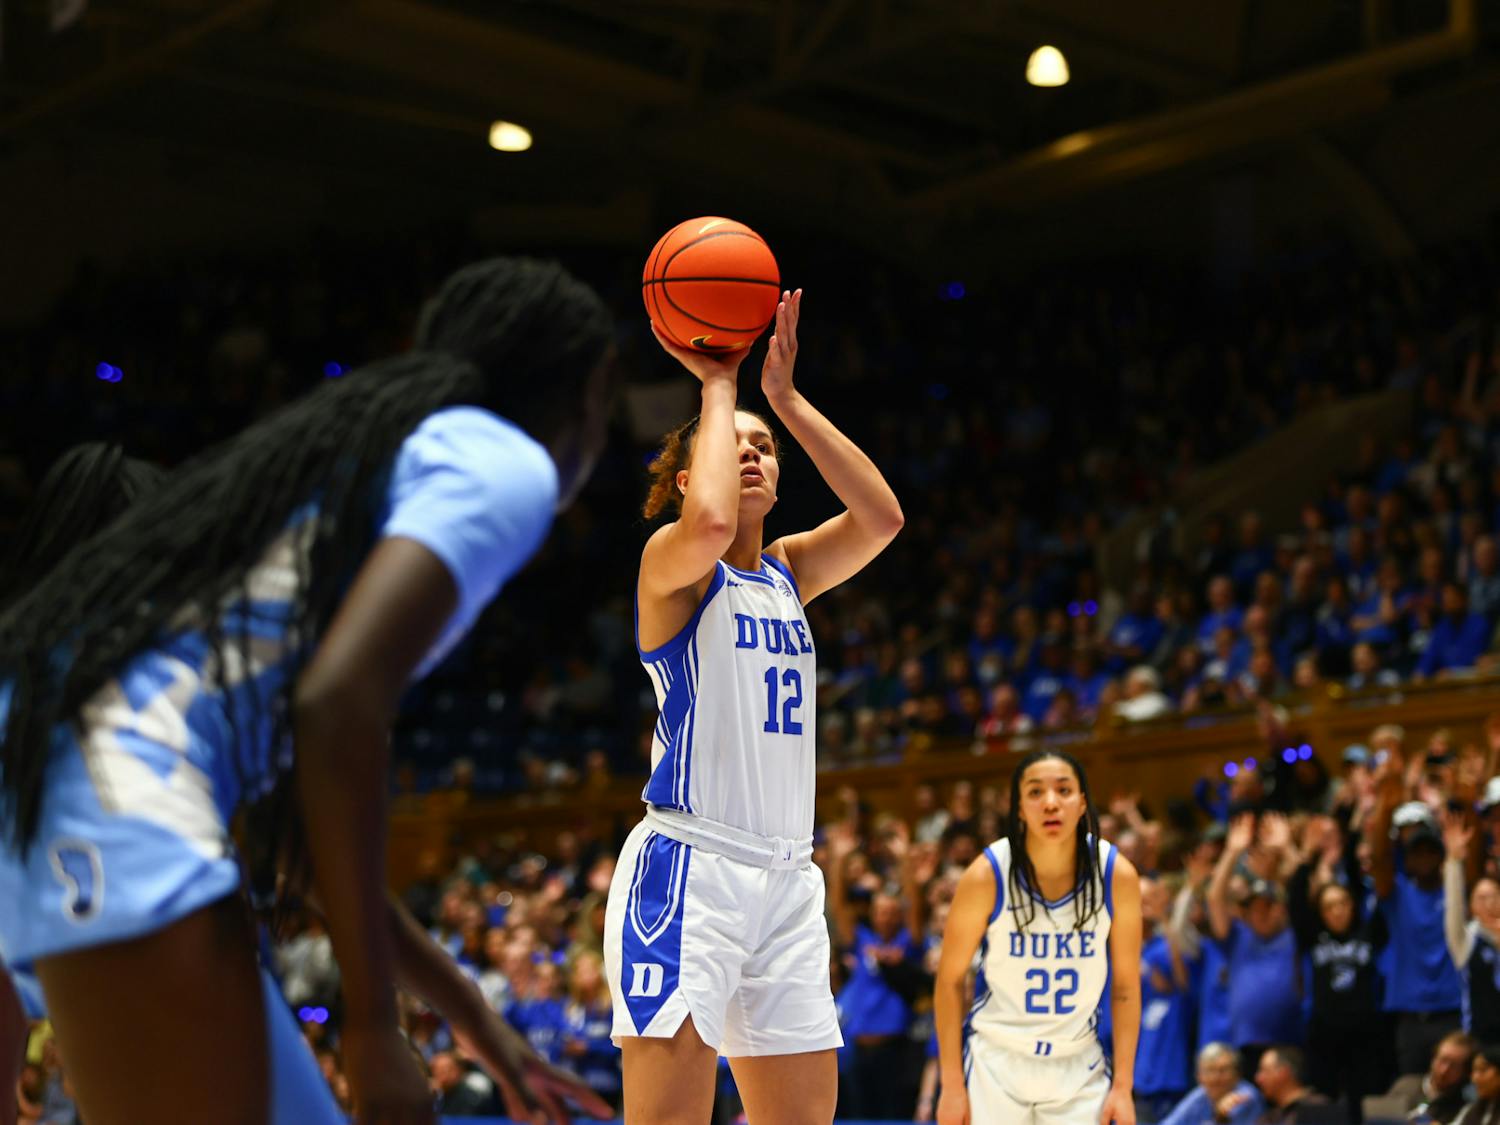 Delaney Thomas shoots from the free throw line during her career-best performance against North Carolina.